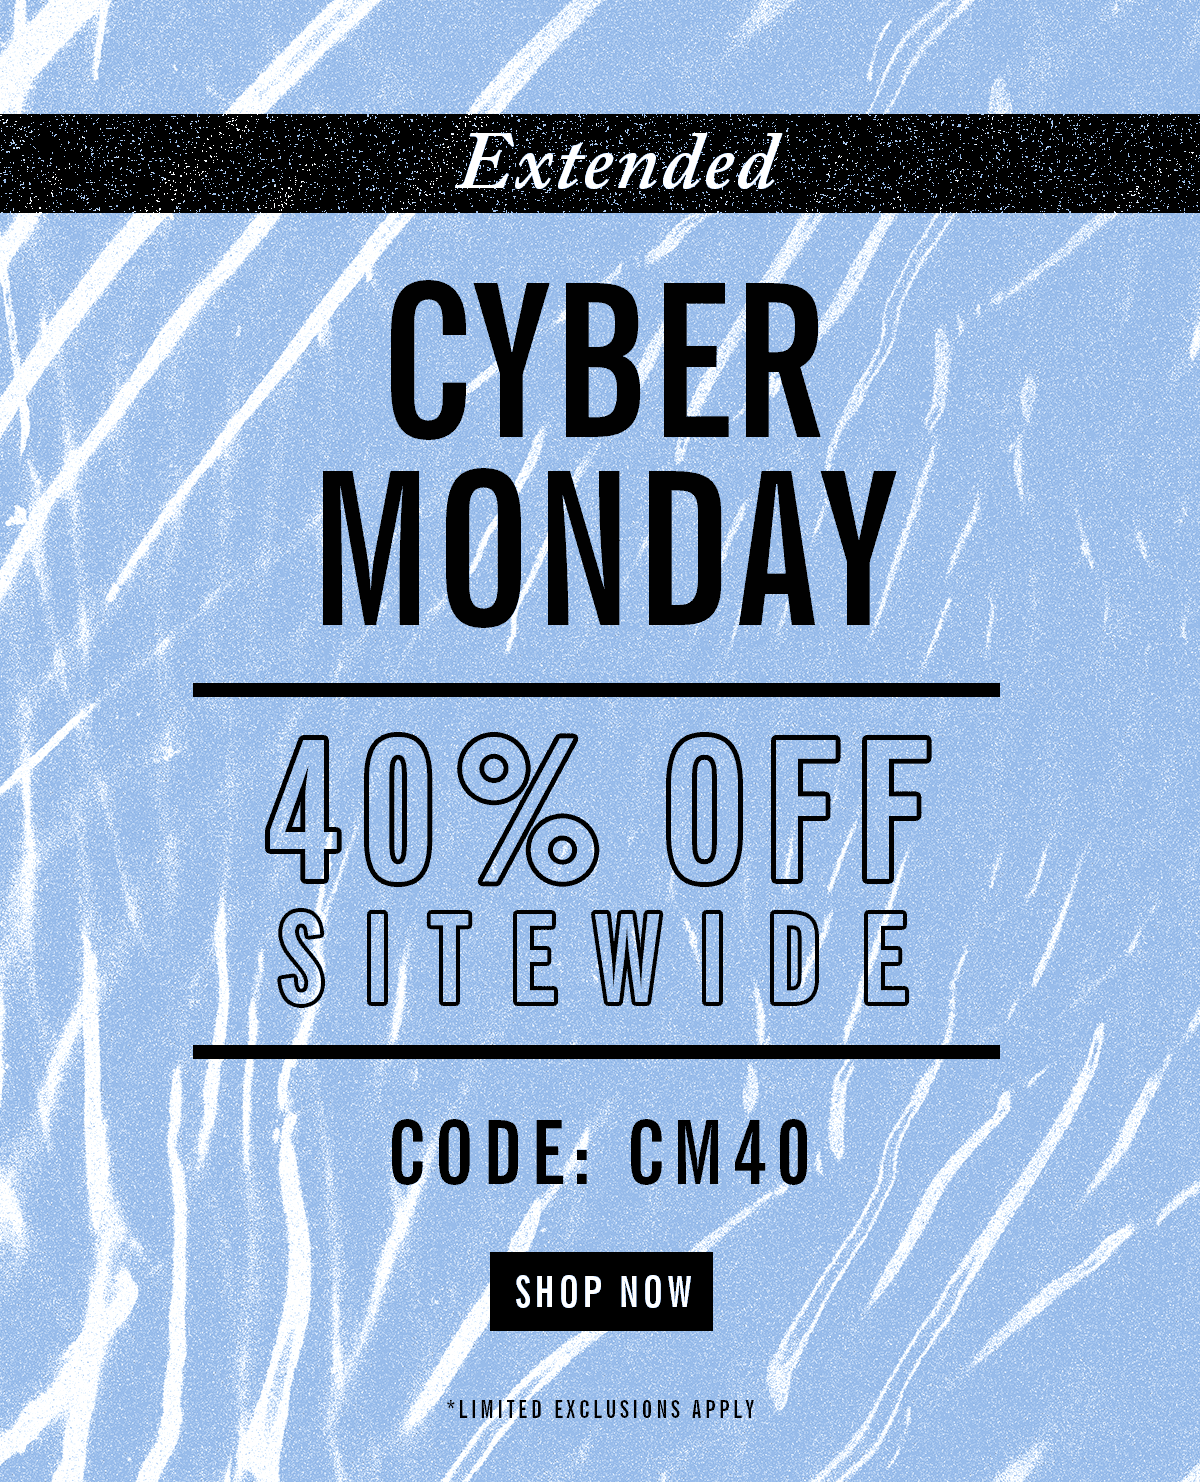 Extended | Cyber Monday | 40% Off Sitewide | Code: CM40 | Shop Now | Limited Exclusions Apply